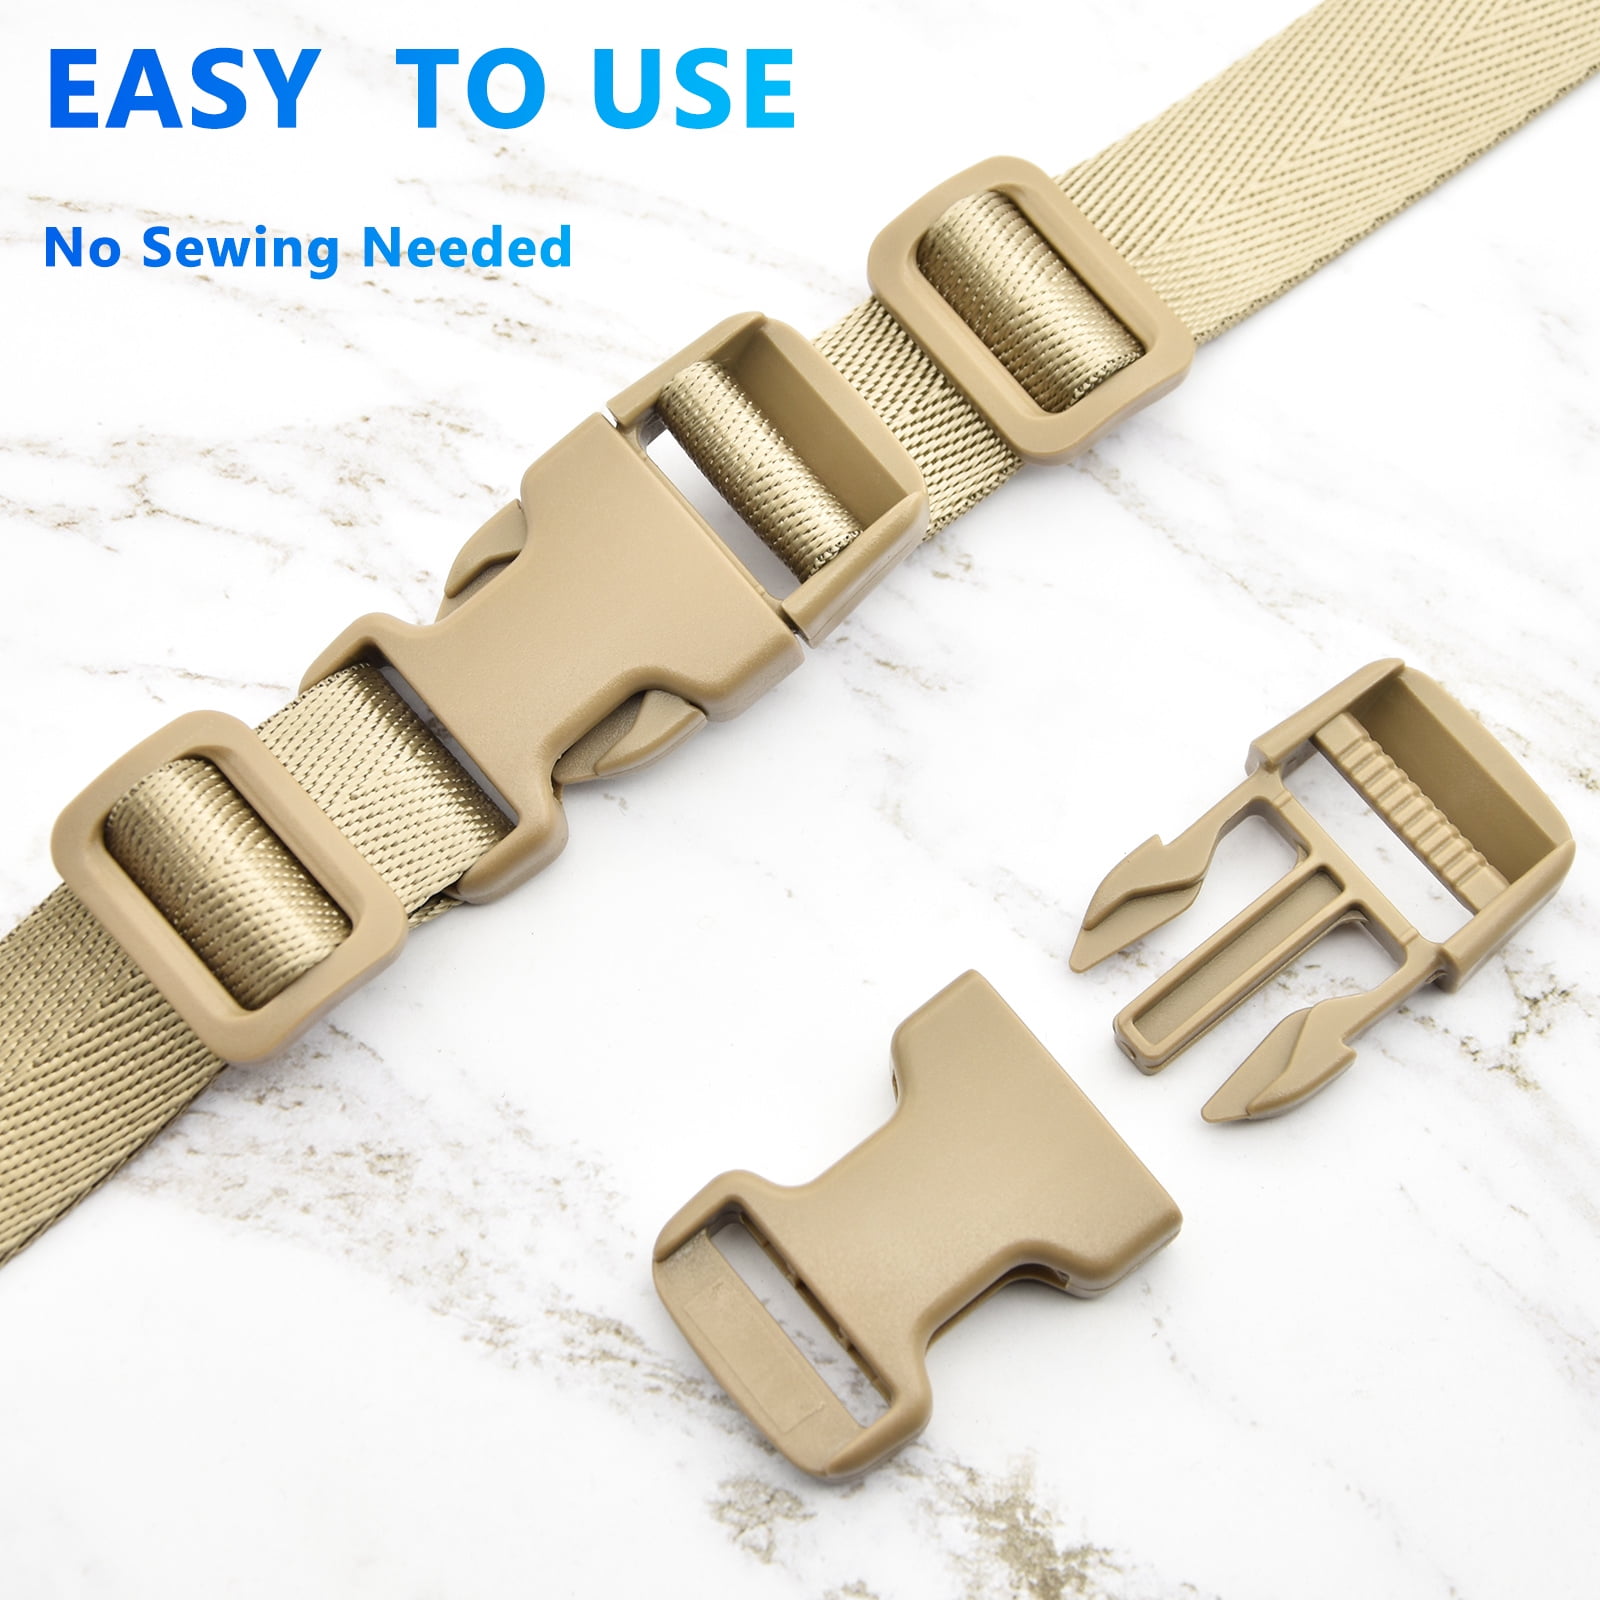 REDAPRIC Buckles Nylon Strap Set of 1 inch 10 Yards Webbing Straps With 10  pcs Nylon Quick Side Release Buckle and 20 pcs Tri-Glide Plastic Buckles